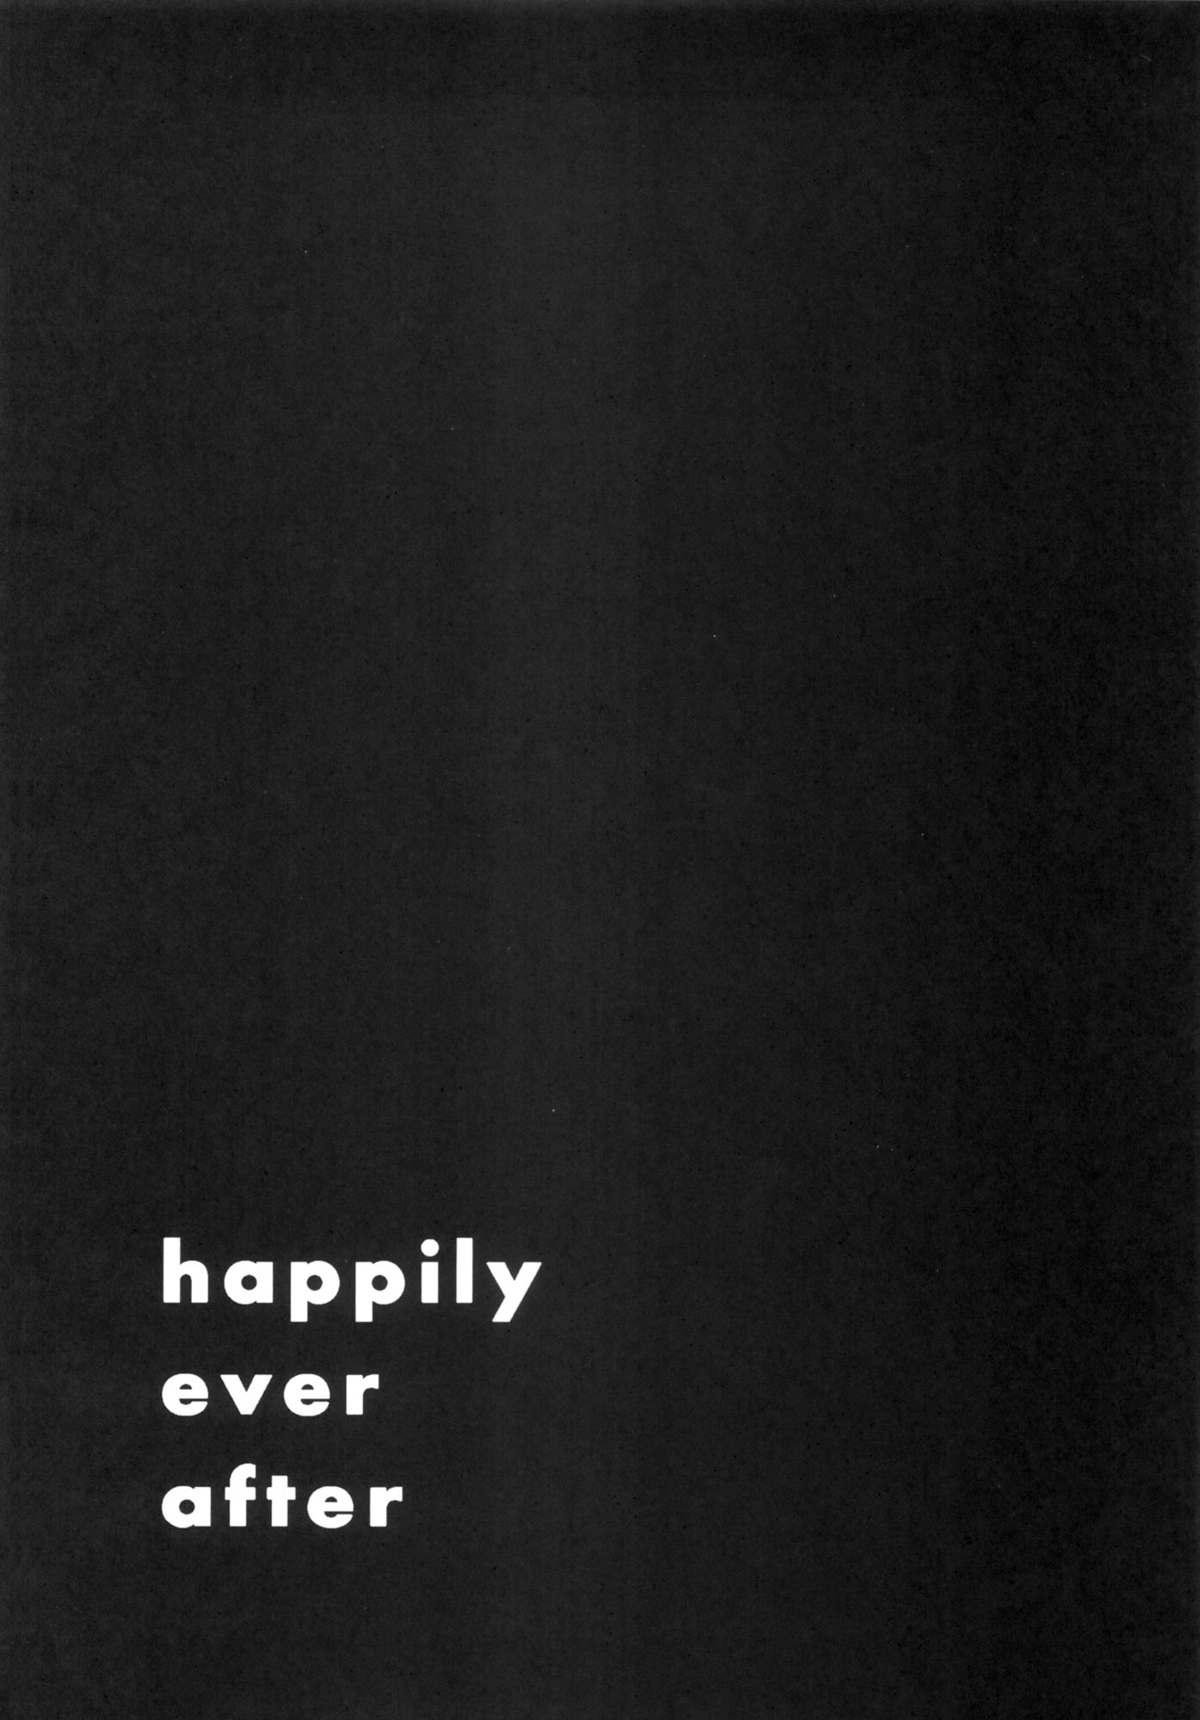 happily ever after 5